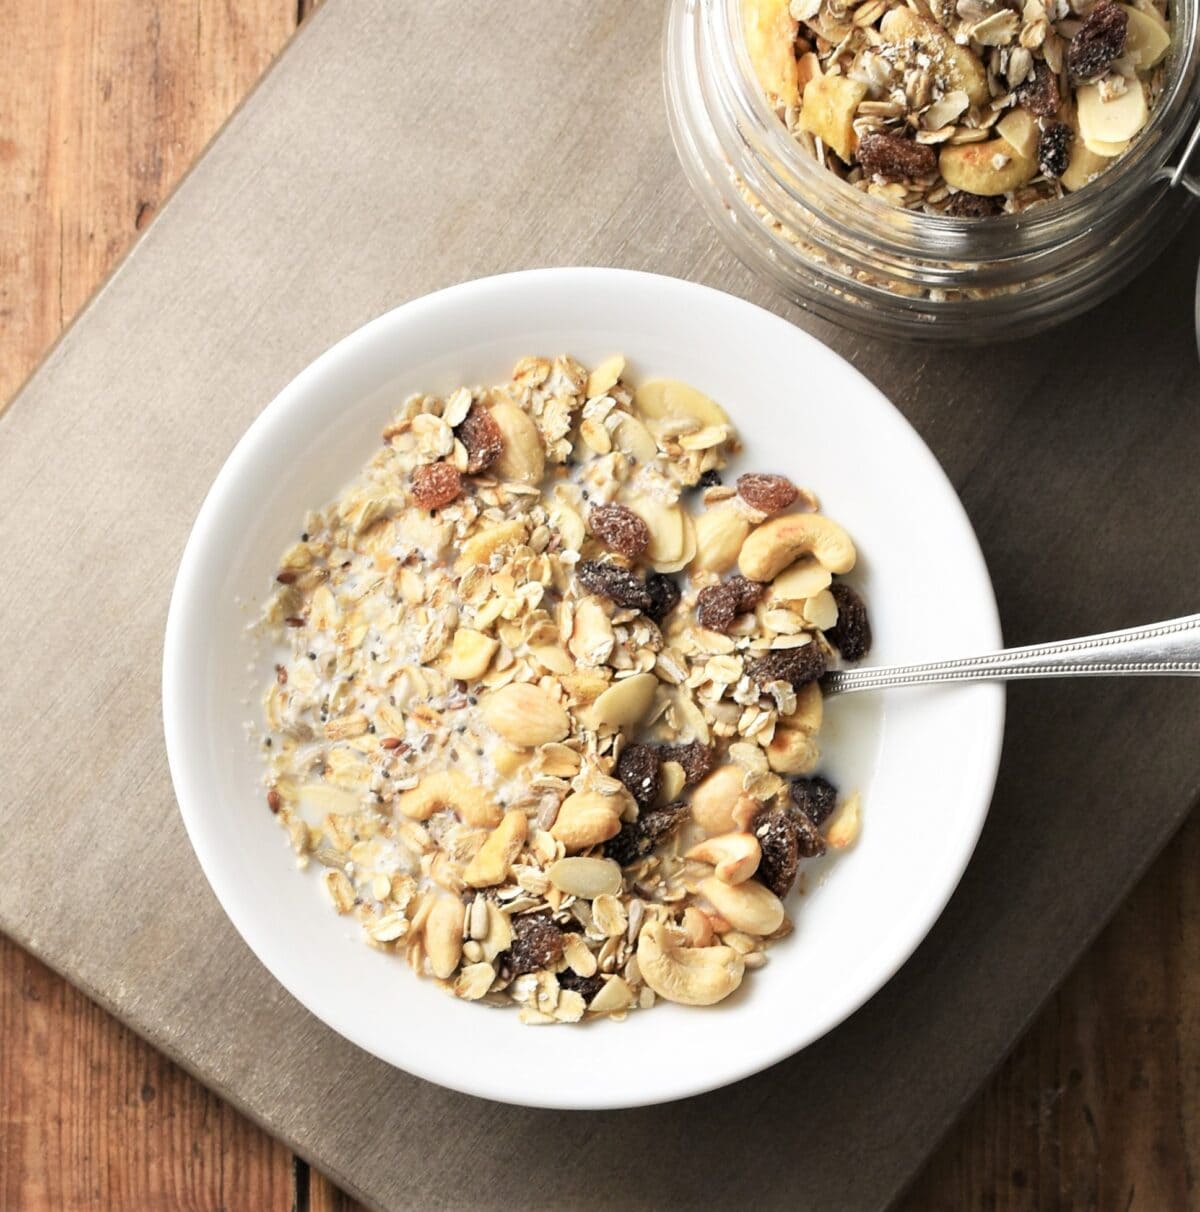 Muesli in white bowl with spoon, with muesli in open jar in top right.